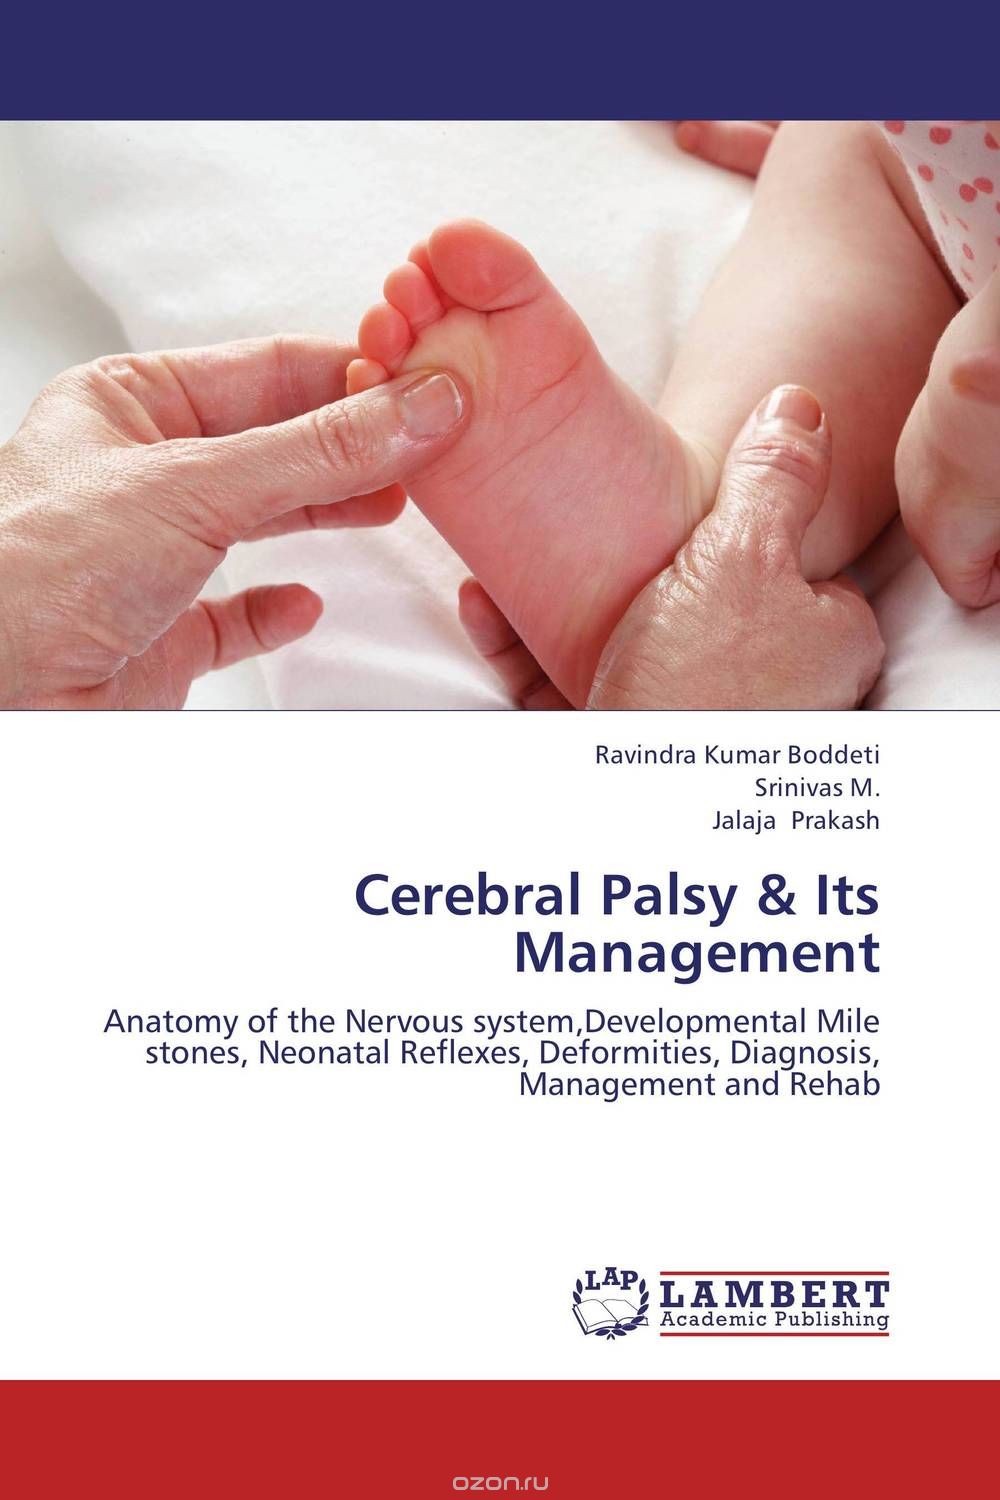 Cerebral Palsy & Its Management